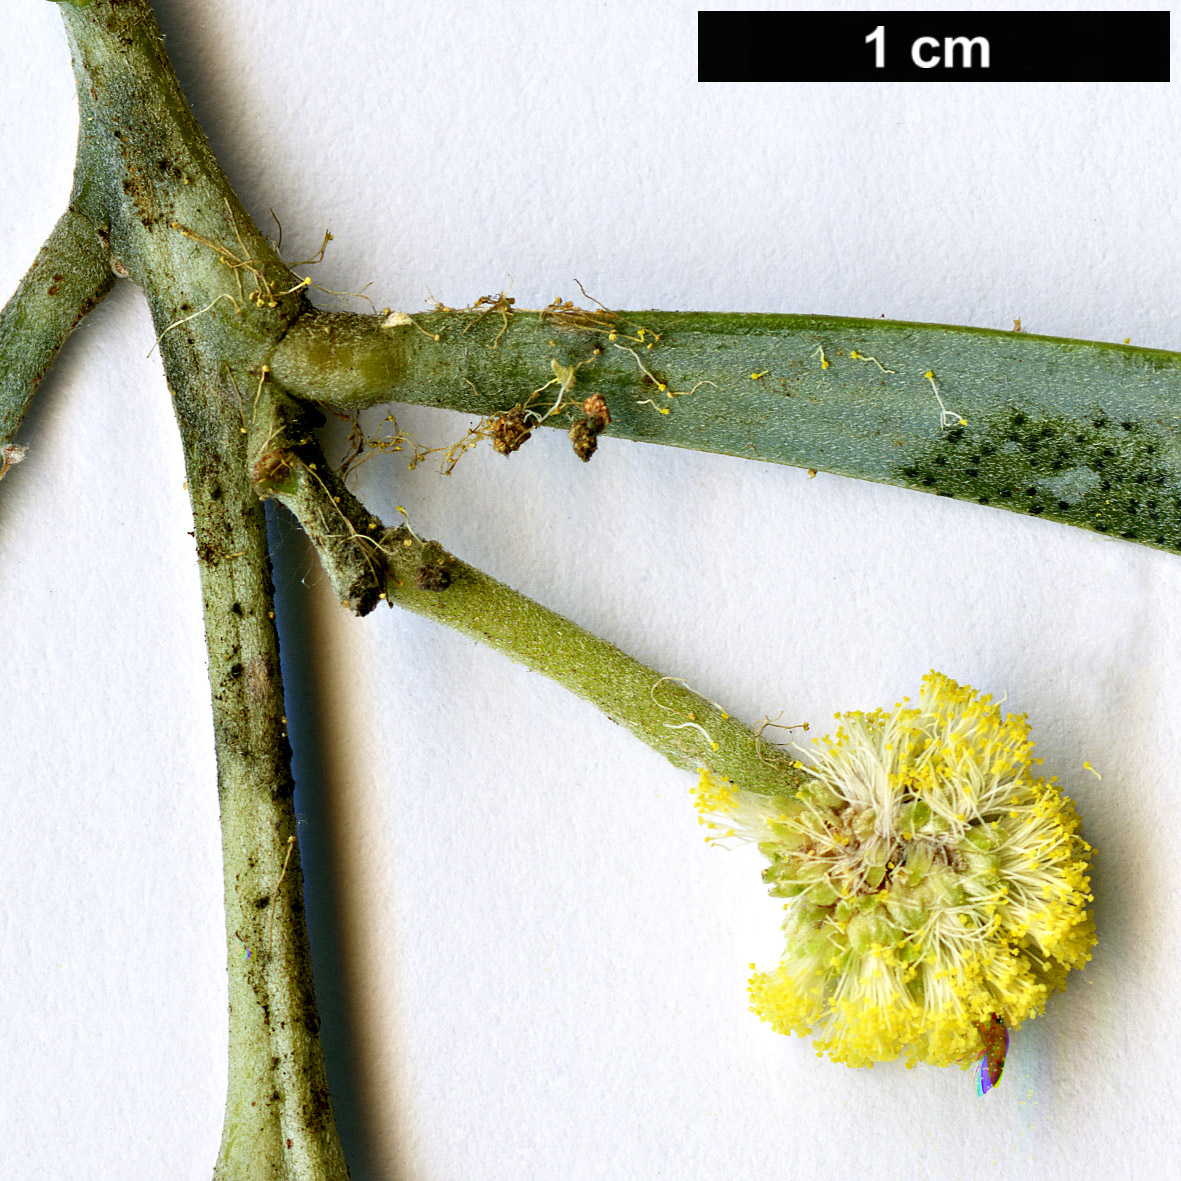 High resolution image: Family: Fabaceae - Genus: Acacia - Taxon: stenophylla